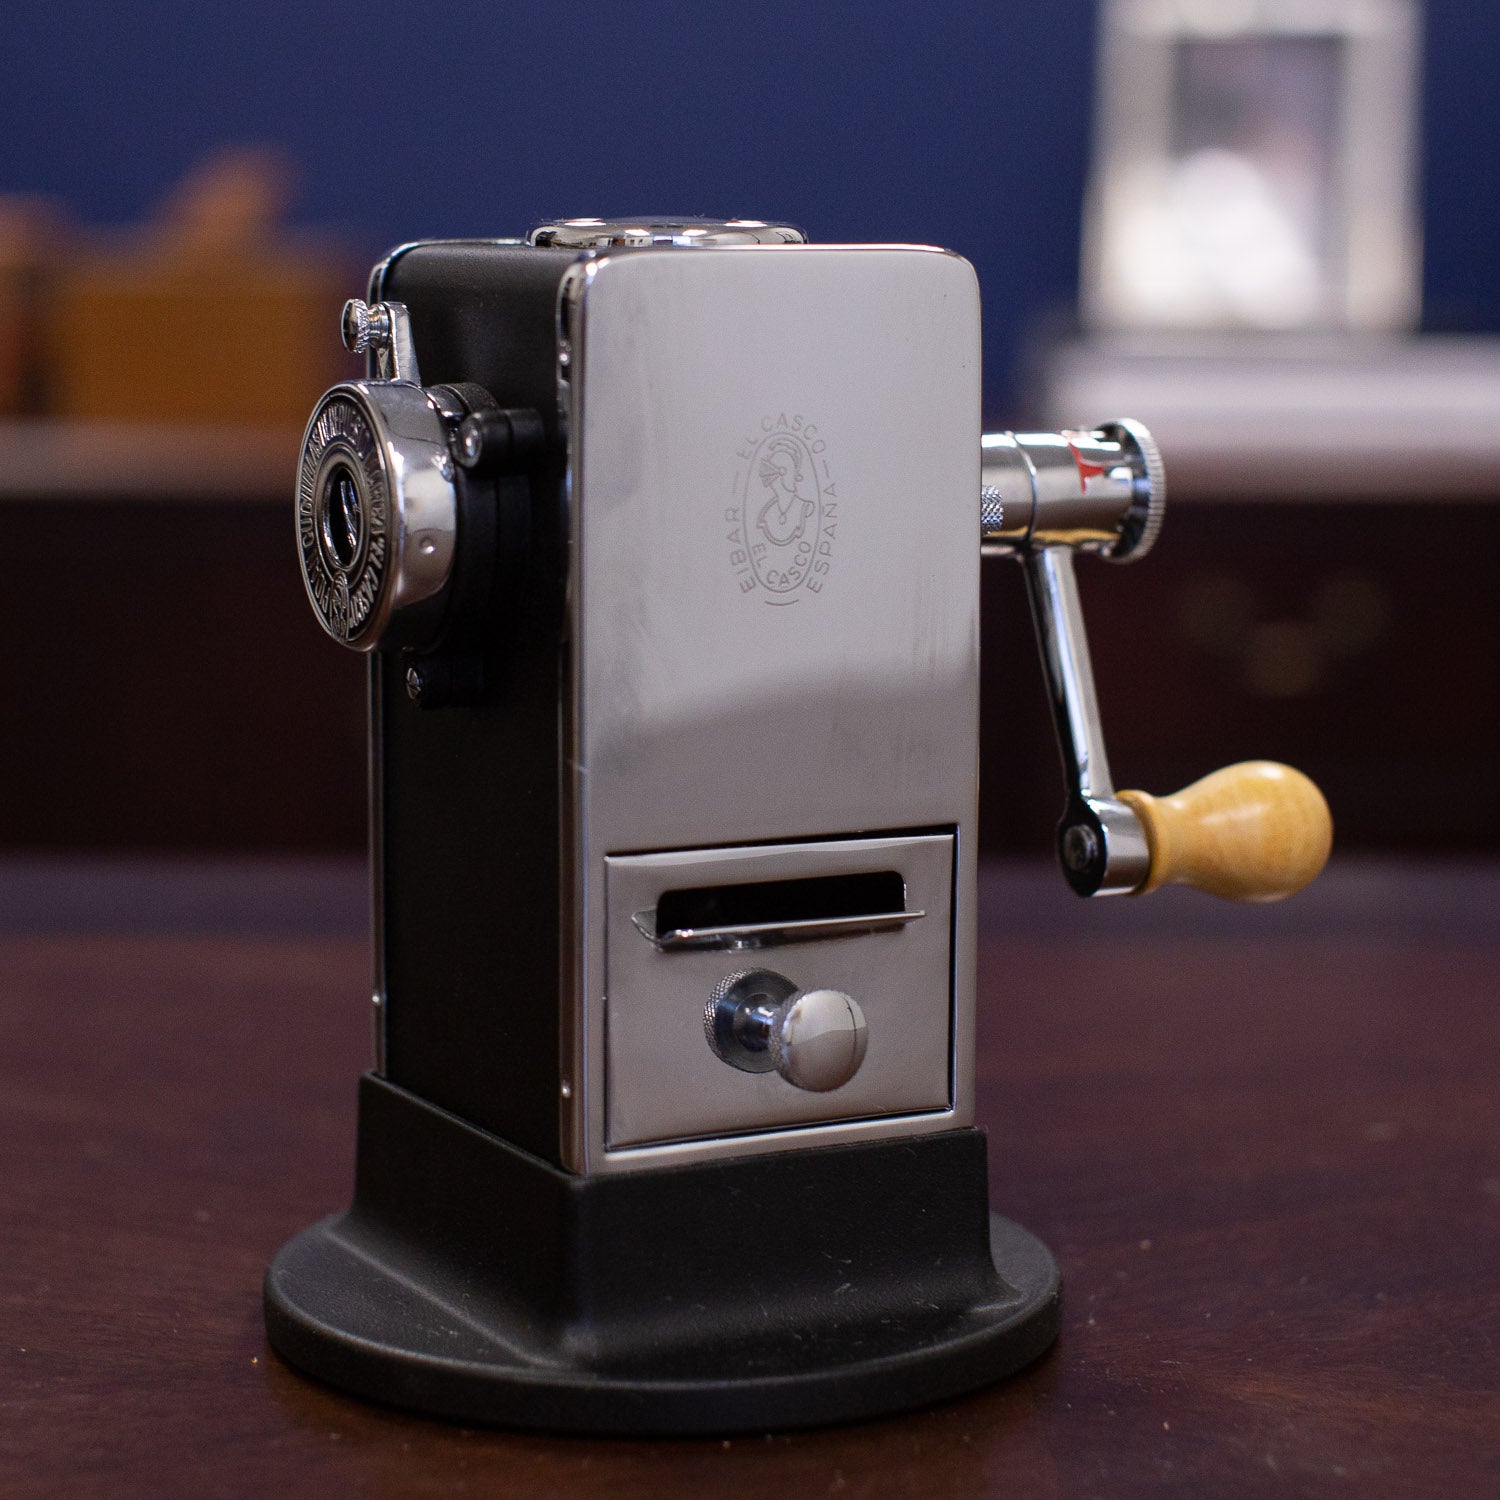 A small El Casco M-430 Pencil Sharpener from KirbyAllison.com is sitting on top of a table.